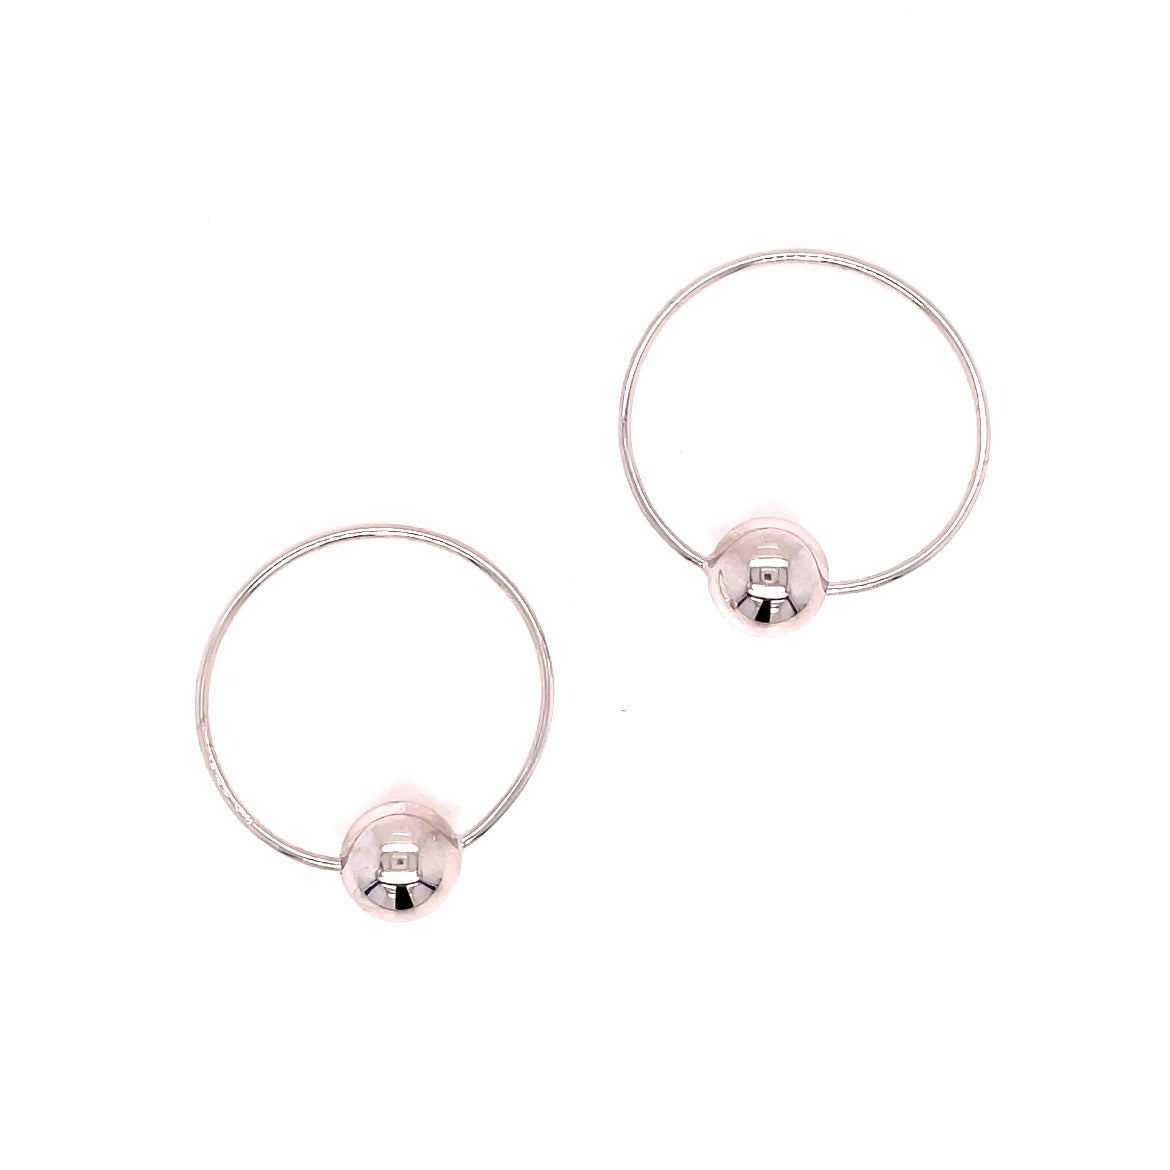 Sterling Silver Hoop Earring With Ball